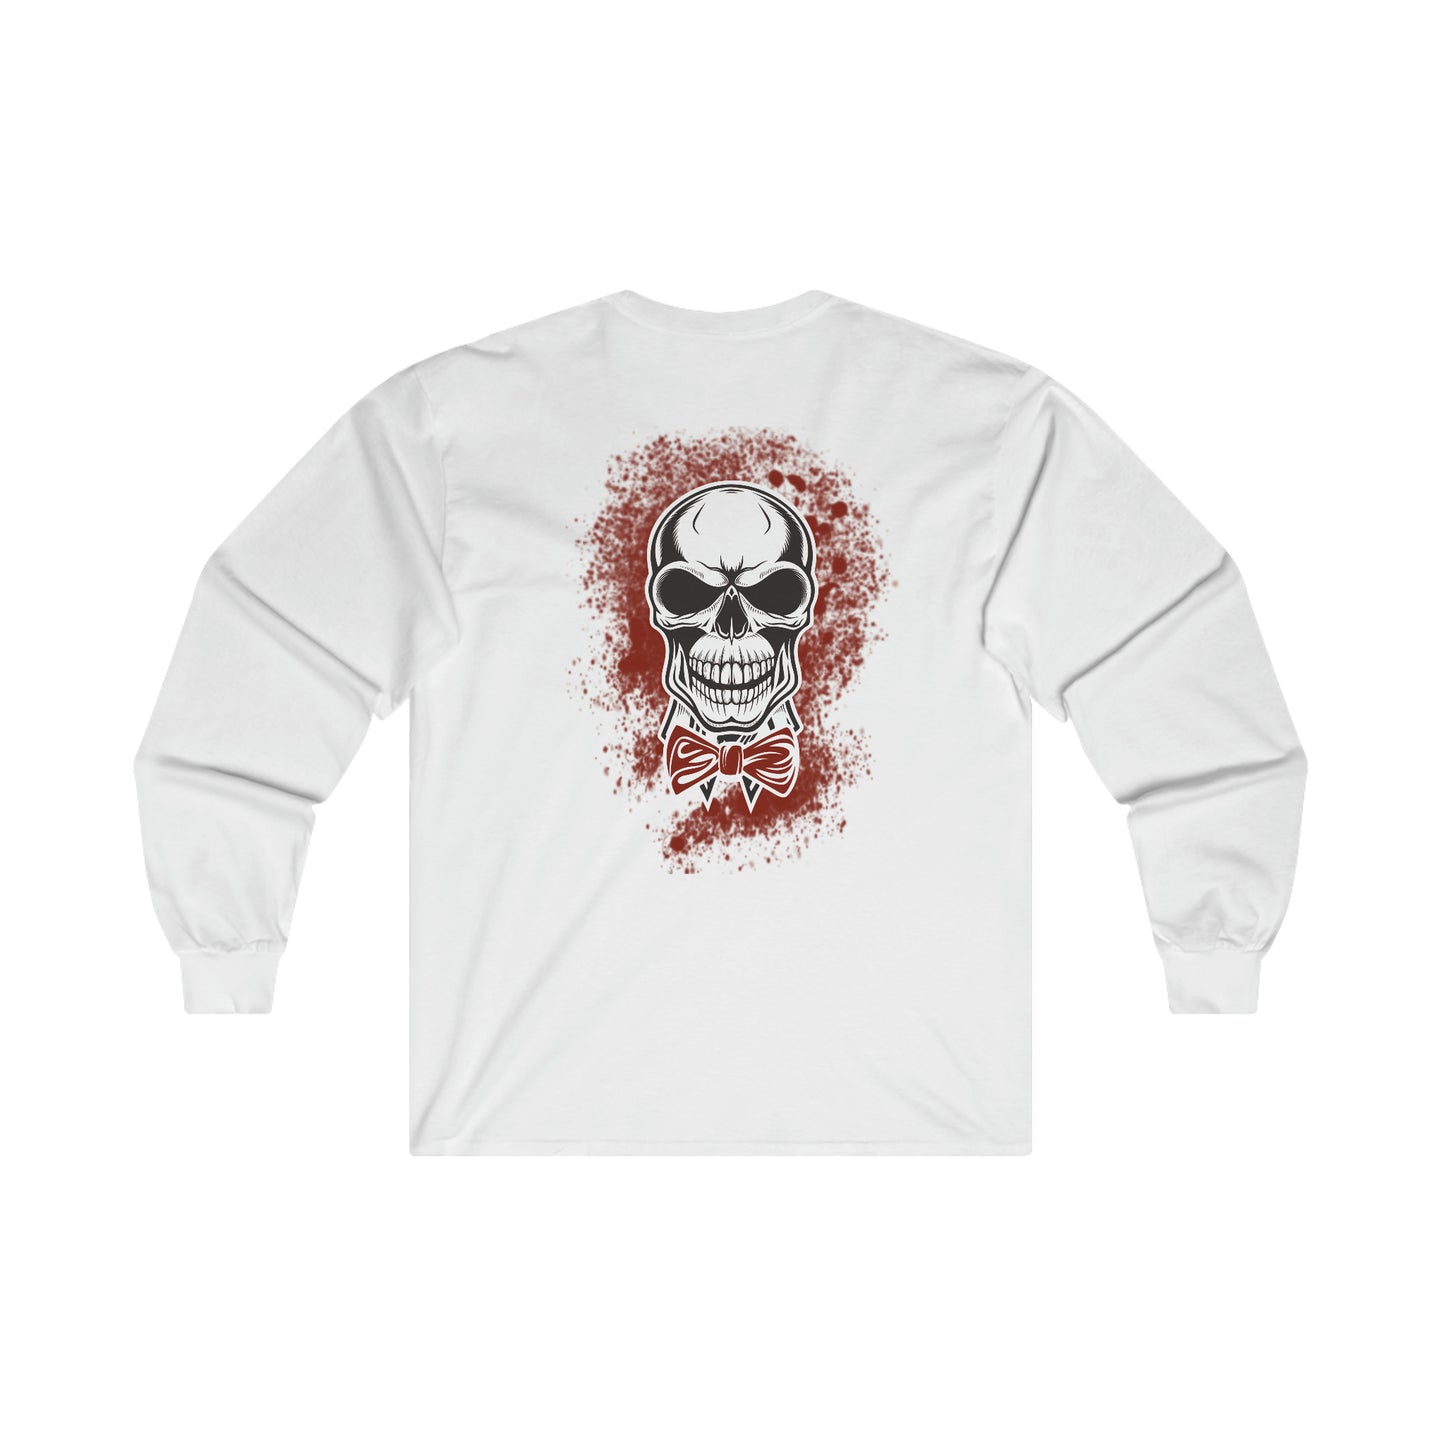 Skull and Bow Tie - Ultra Cotton Long Sleeve Tee